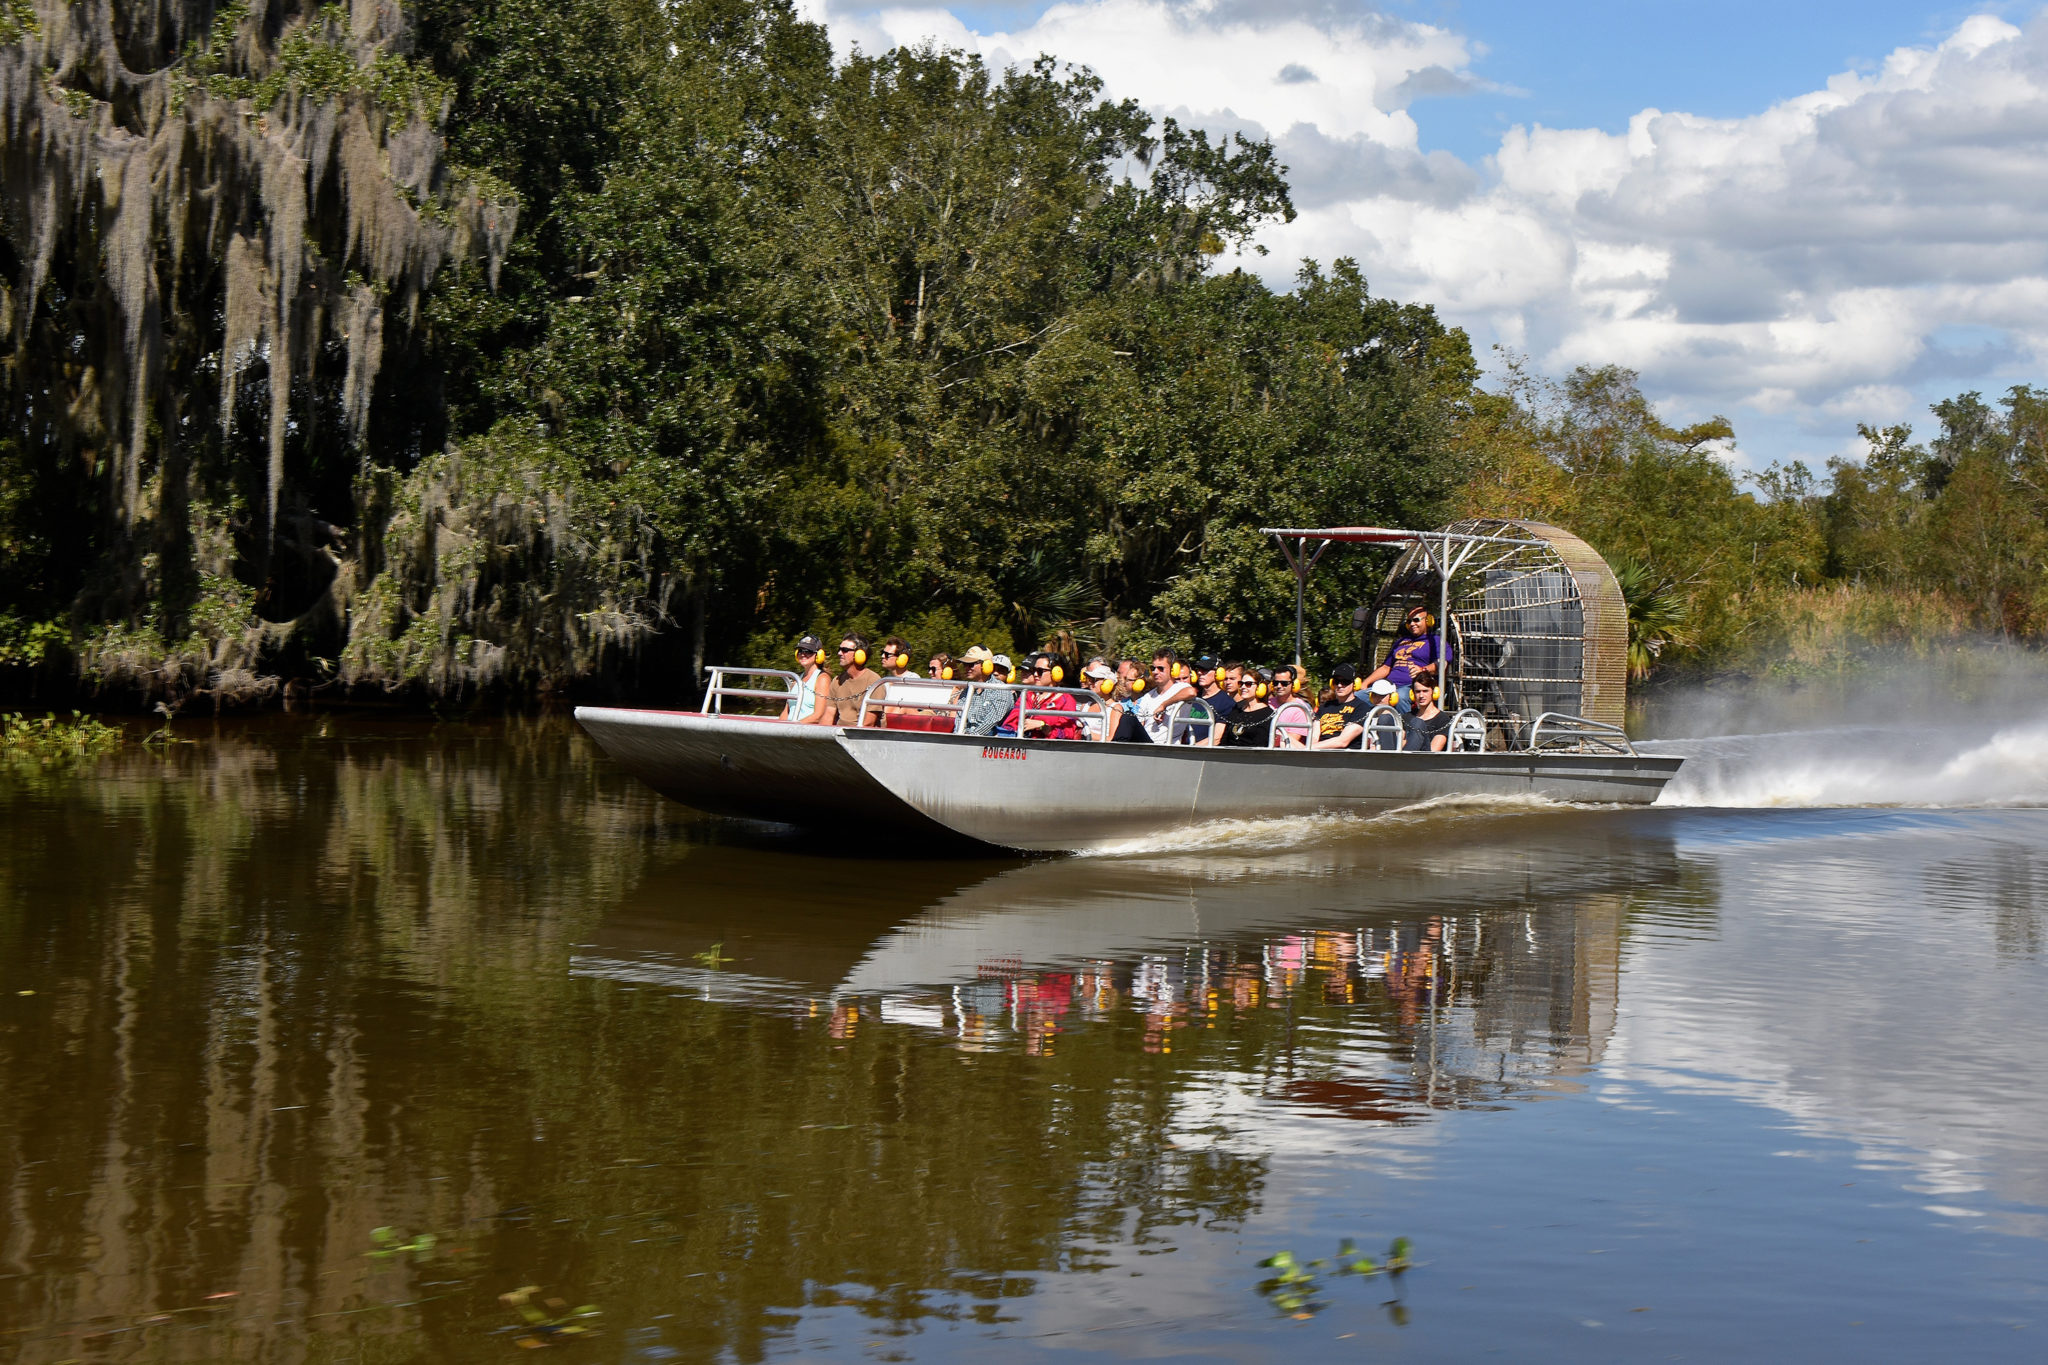 swamp tours in new orleans, alligator tours